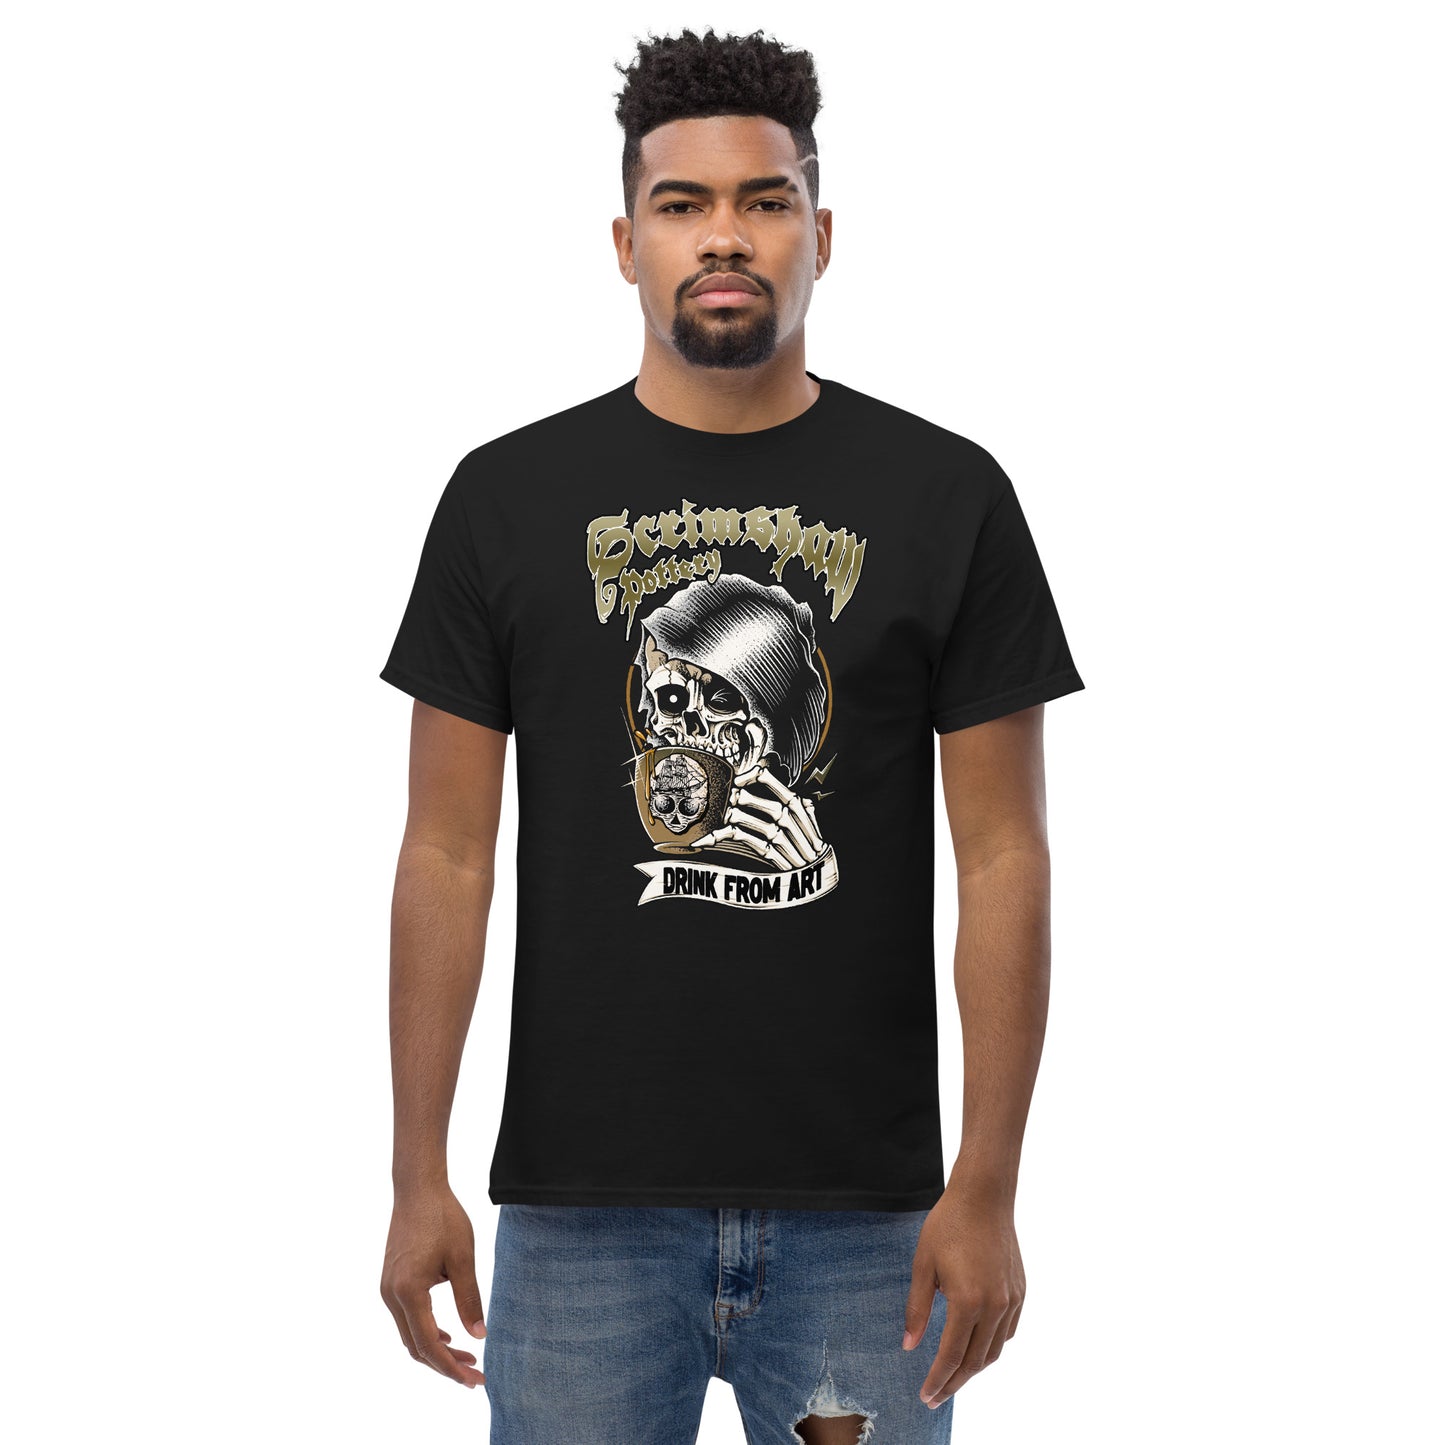 The Sipping Reaper Tee